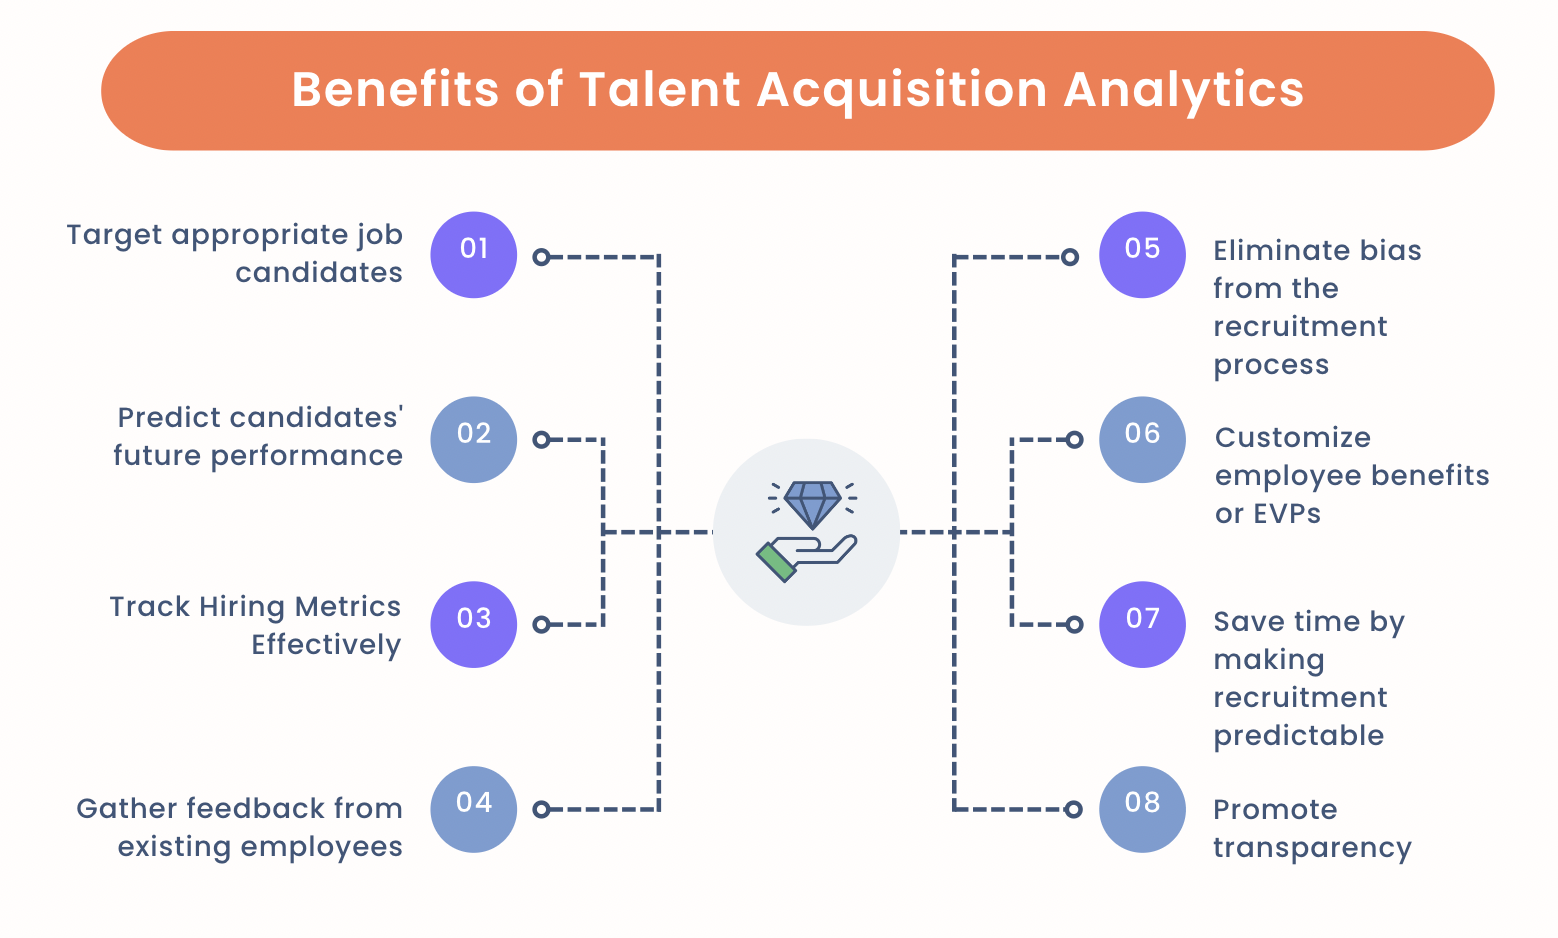 Benefits of talent acquisition analytics